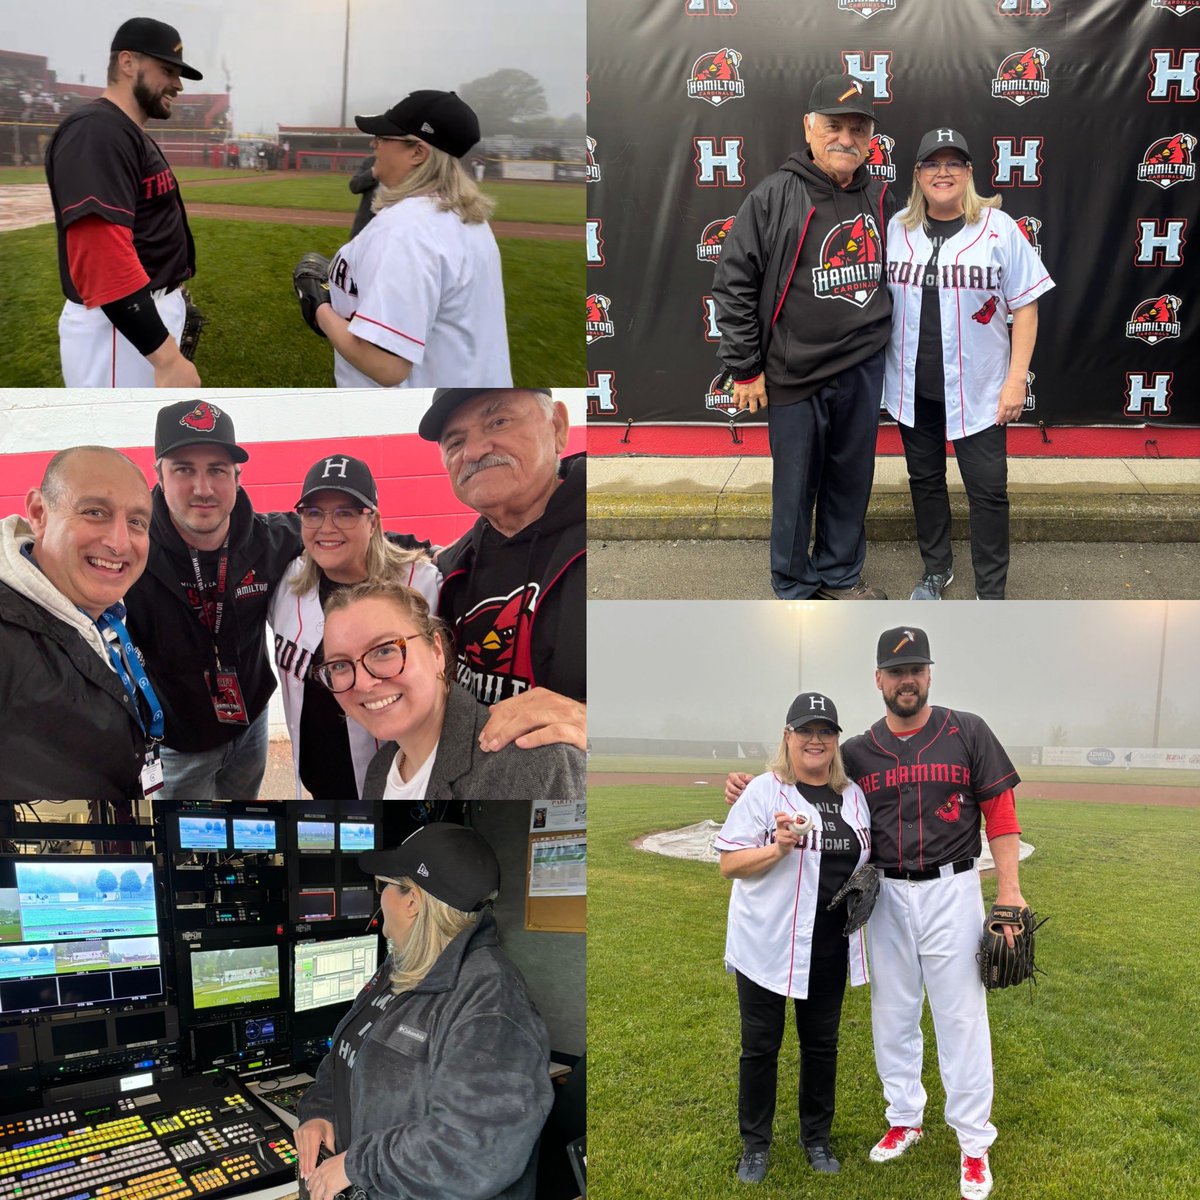 While the rain may have delayed the start of the 2024 season opener, (to this Sunday!) thank you to the Hamilton Cardinals for allowing me to throw the first pitch at the official opening ceremony! ⚾️